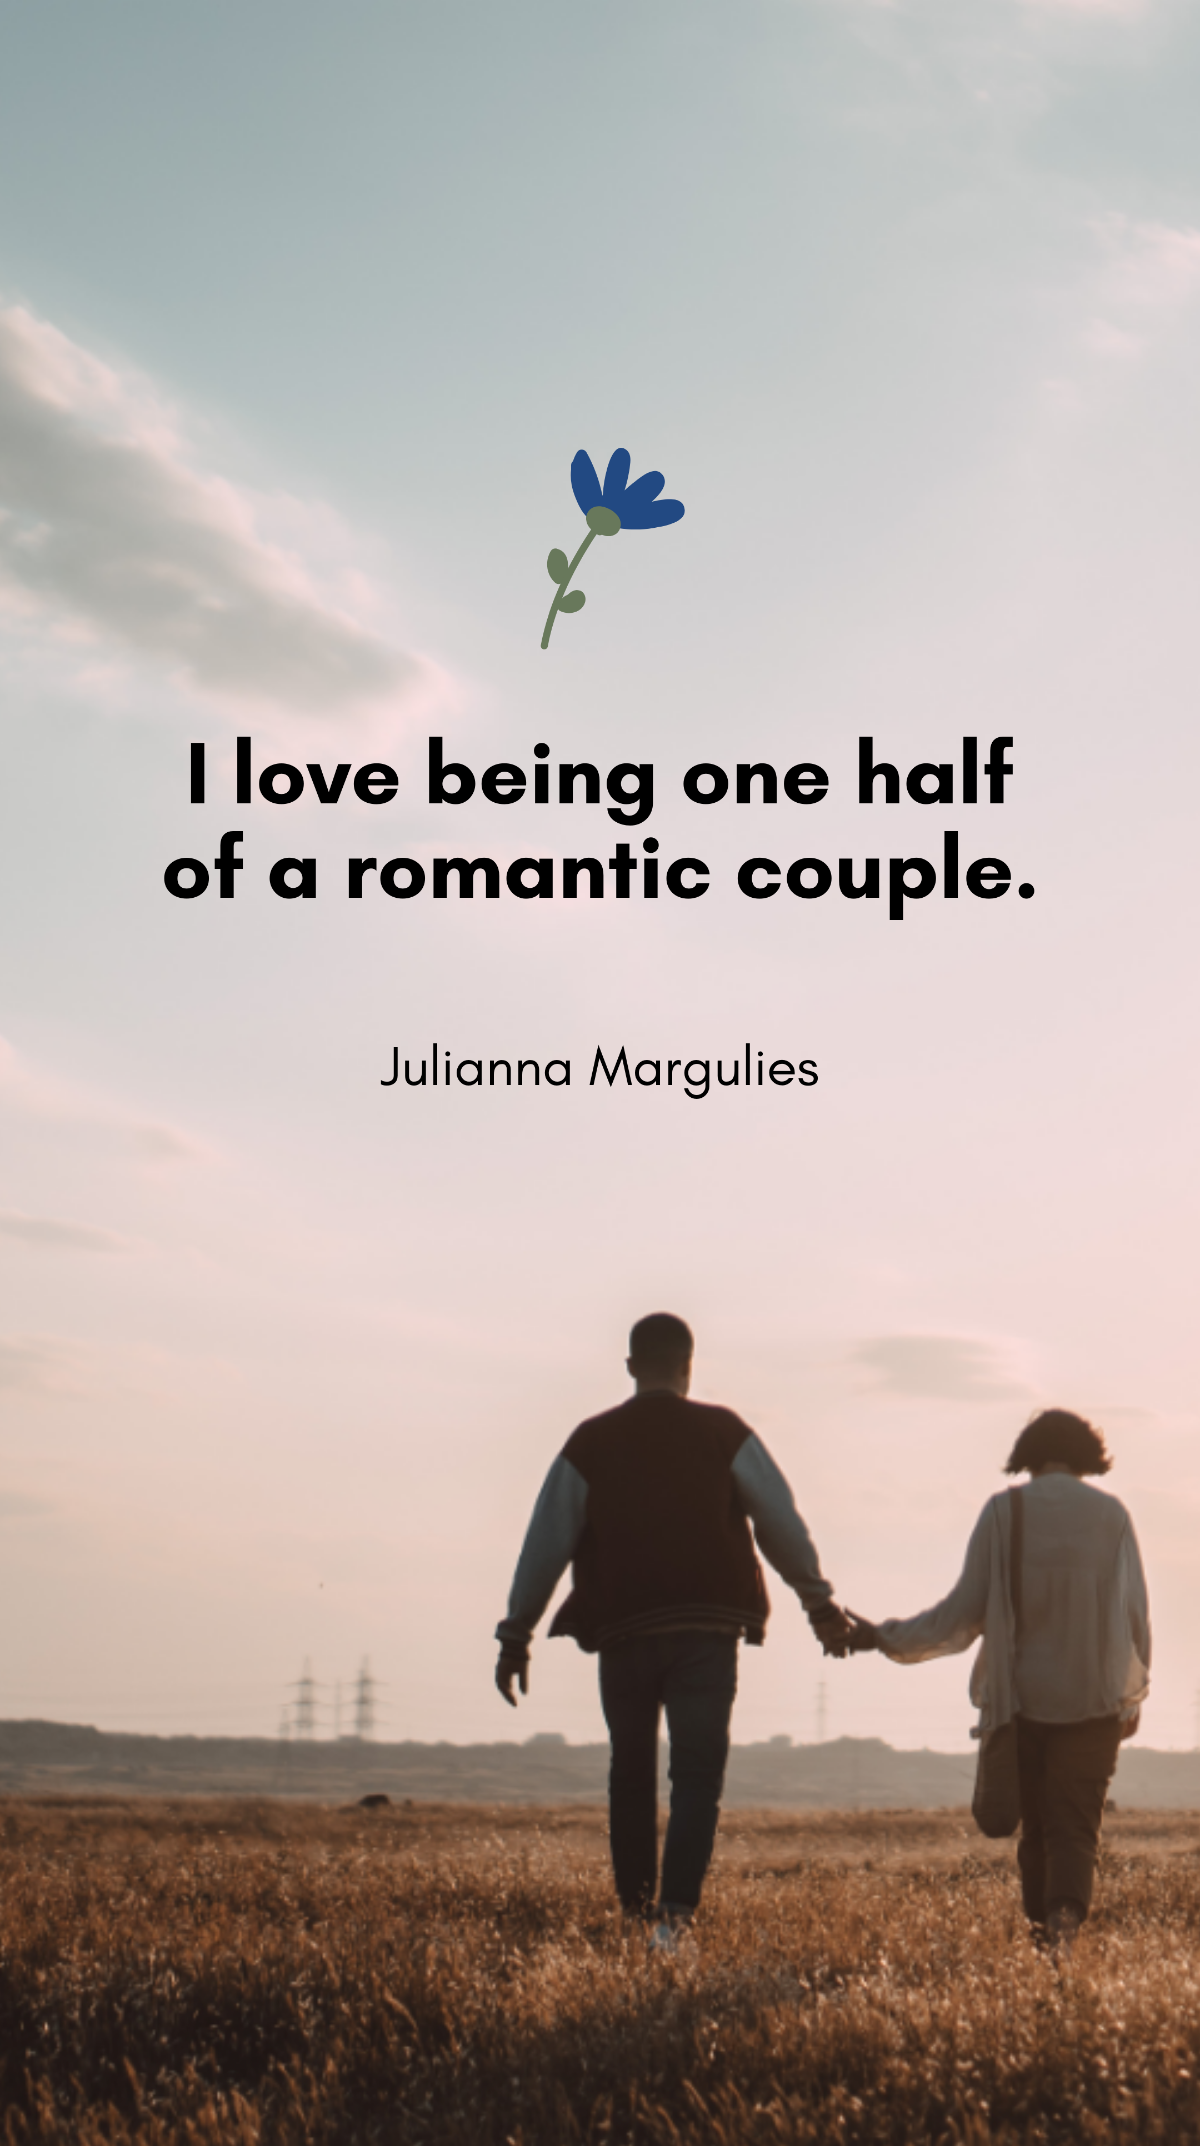 Julianna Margulies - "I love being one half of a romantic couple.” 